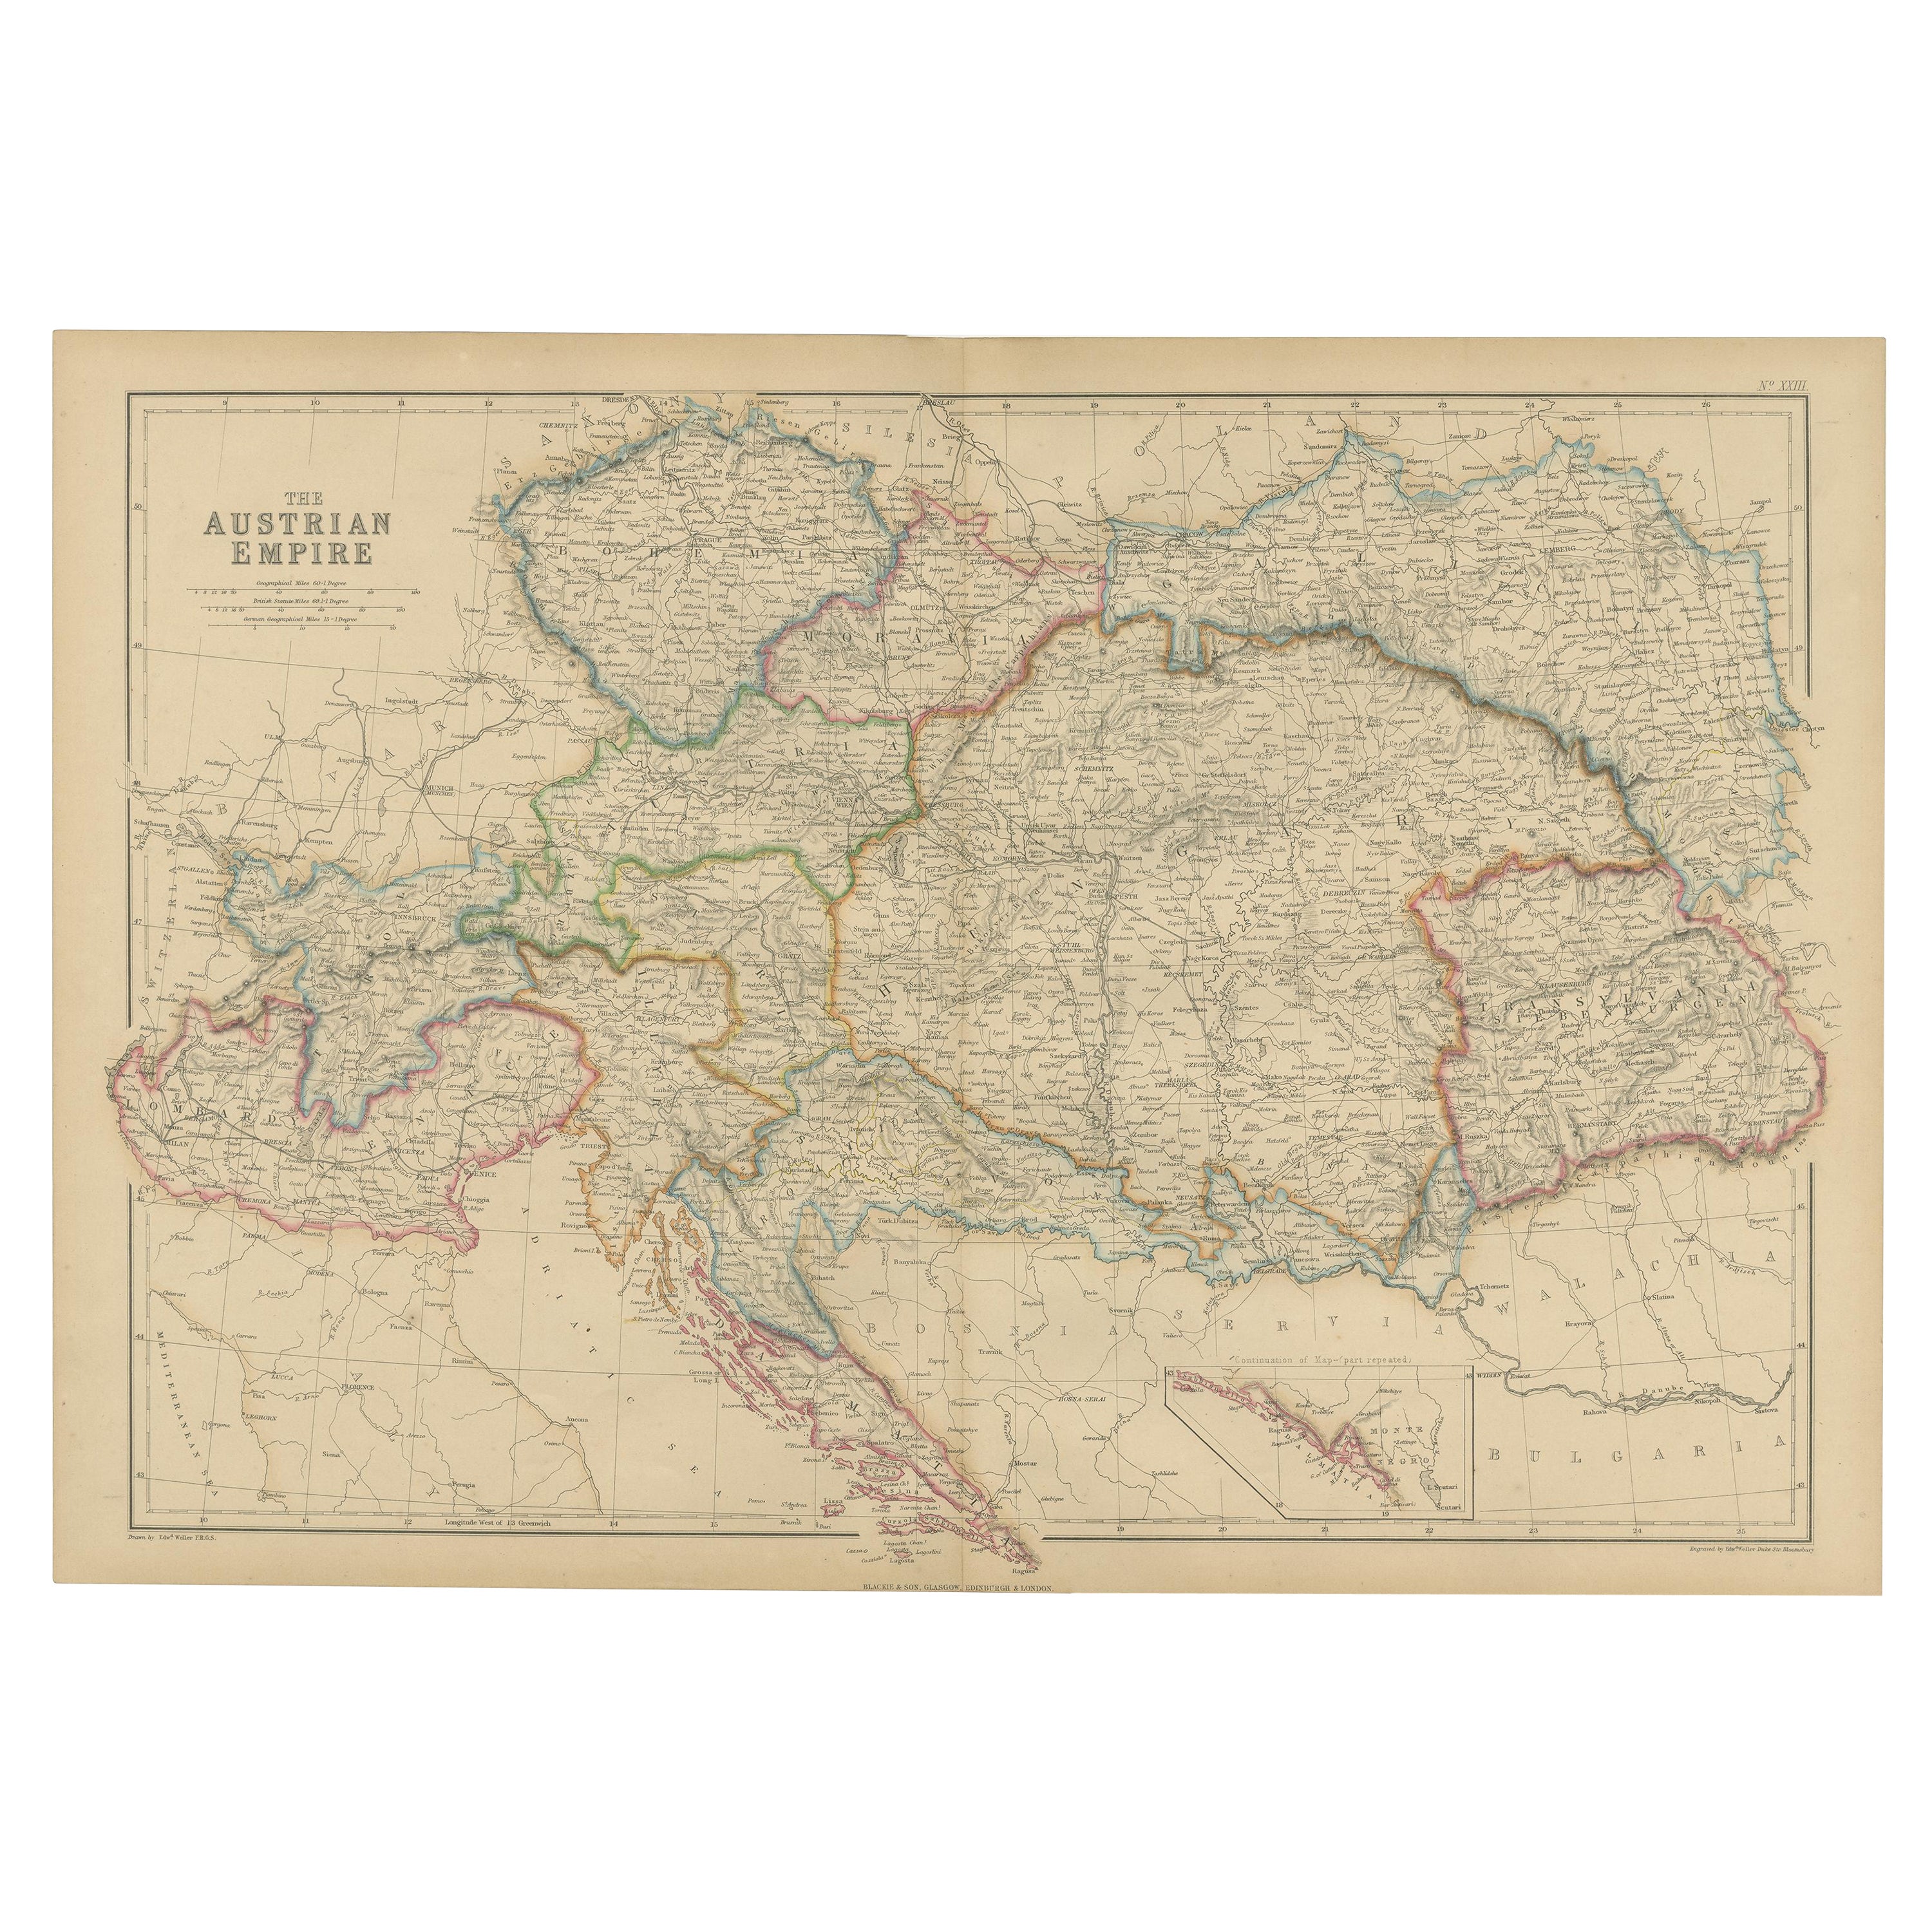 Antique Map of the Austrian Empire by W. G. Blackie, 1859